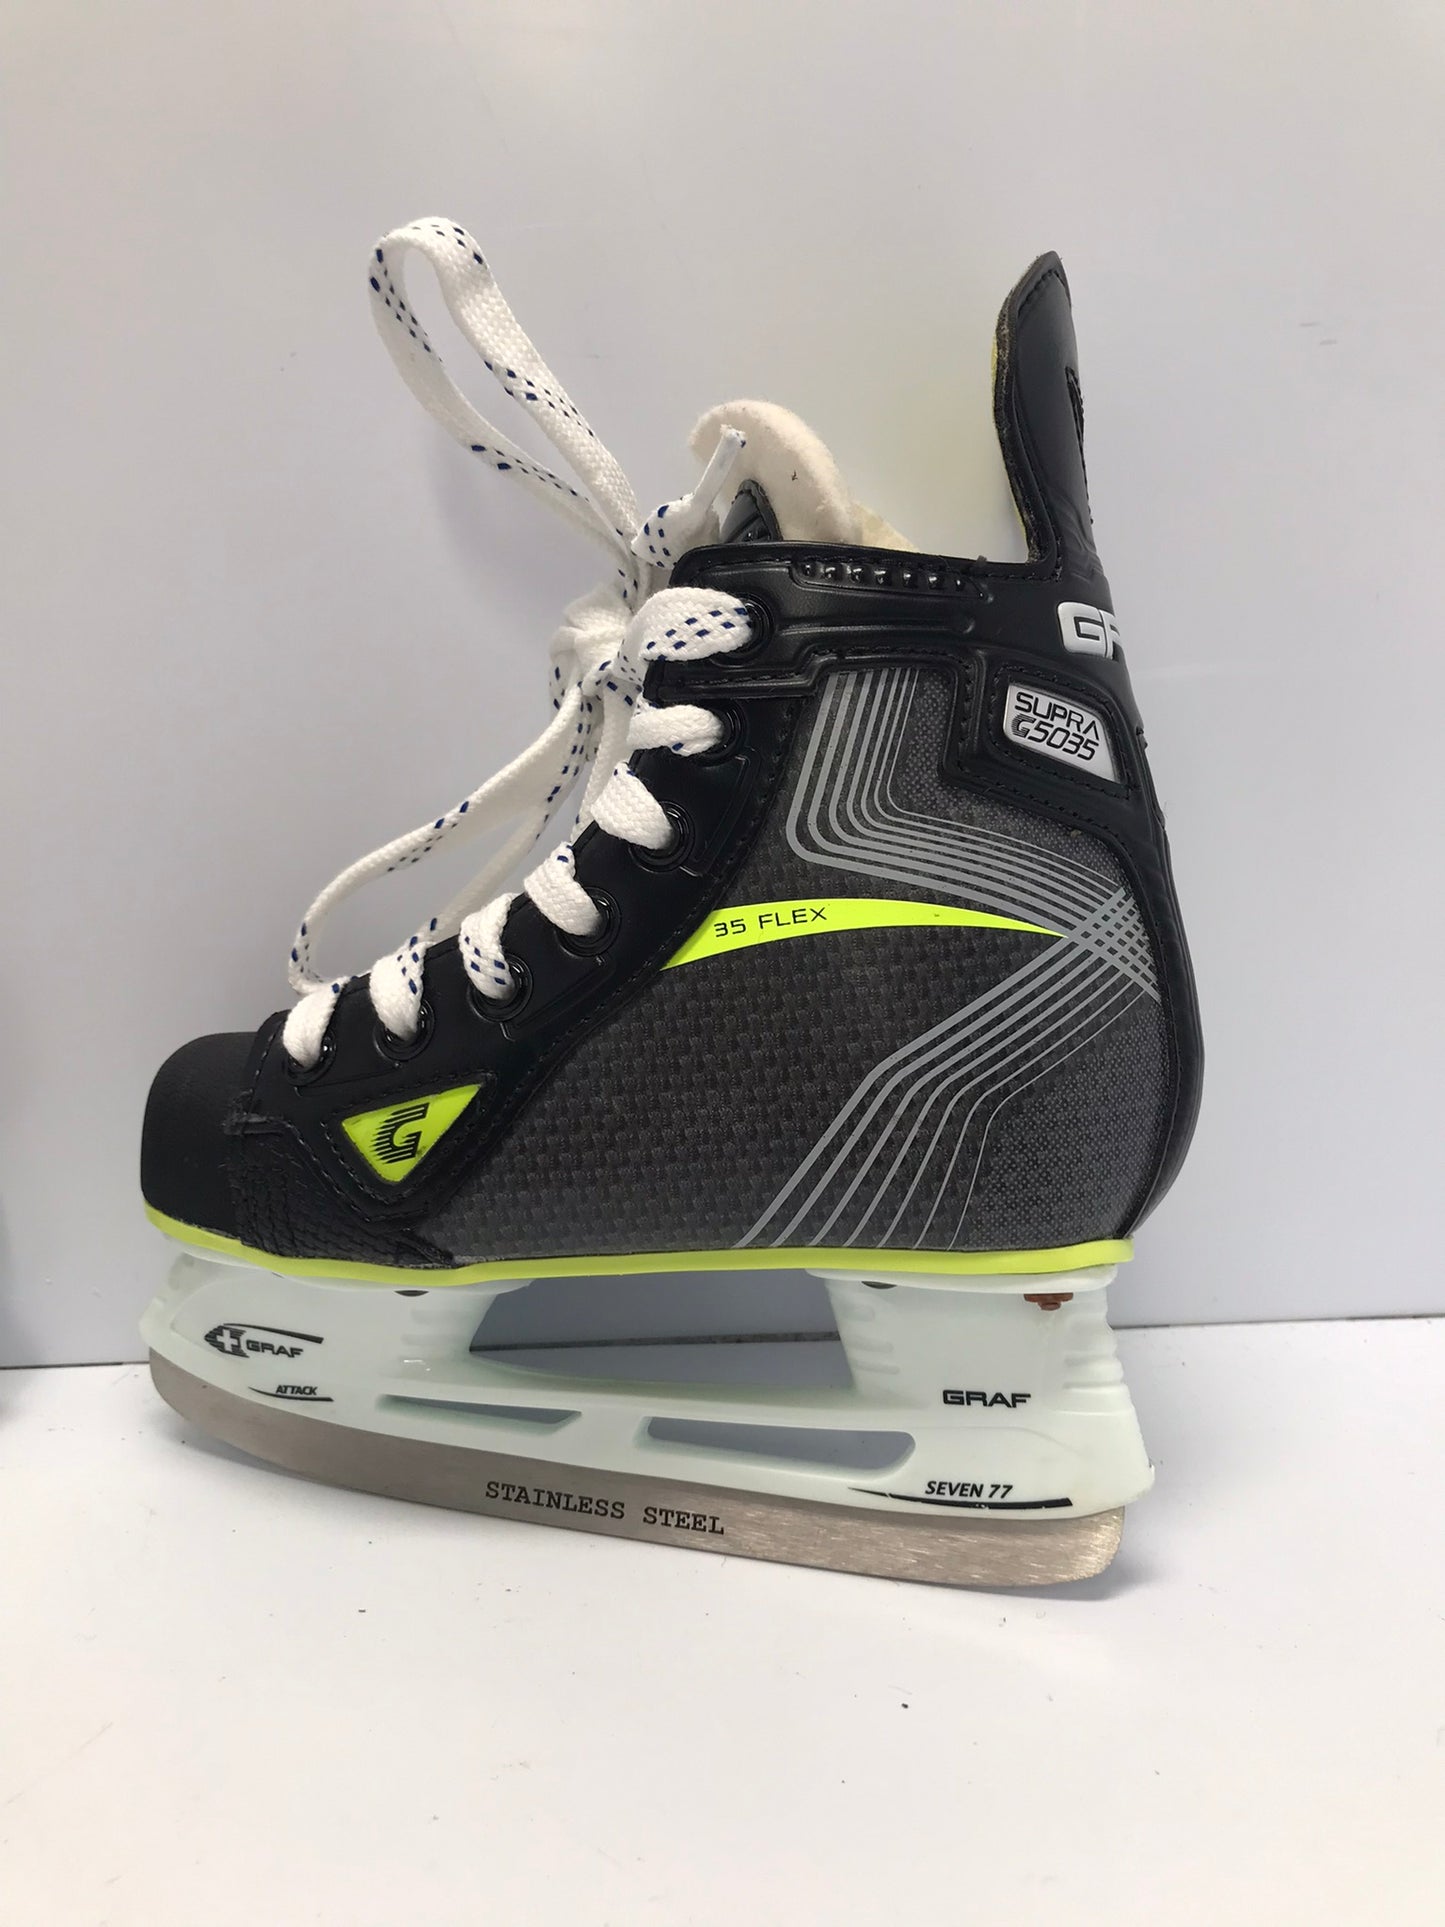 Hockey Skates Child Size 11 Wide Toddler Shoe Size Graf Supra Like New Outstanding